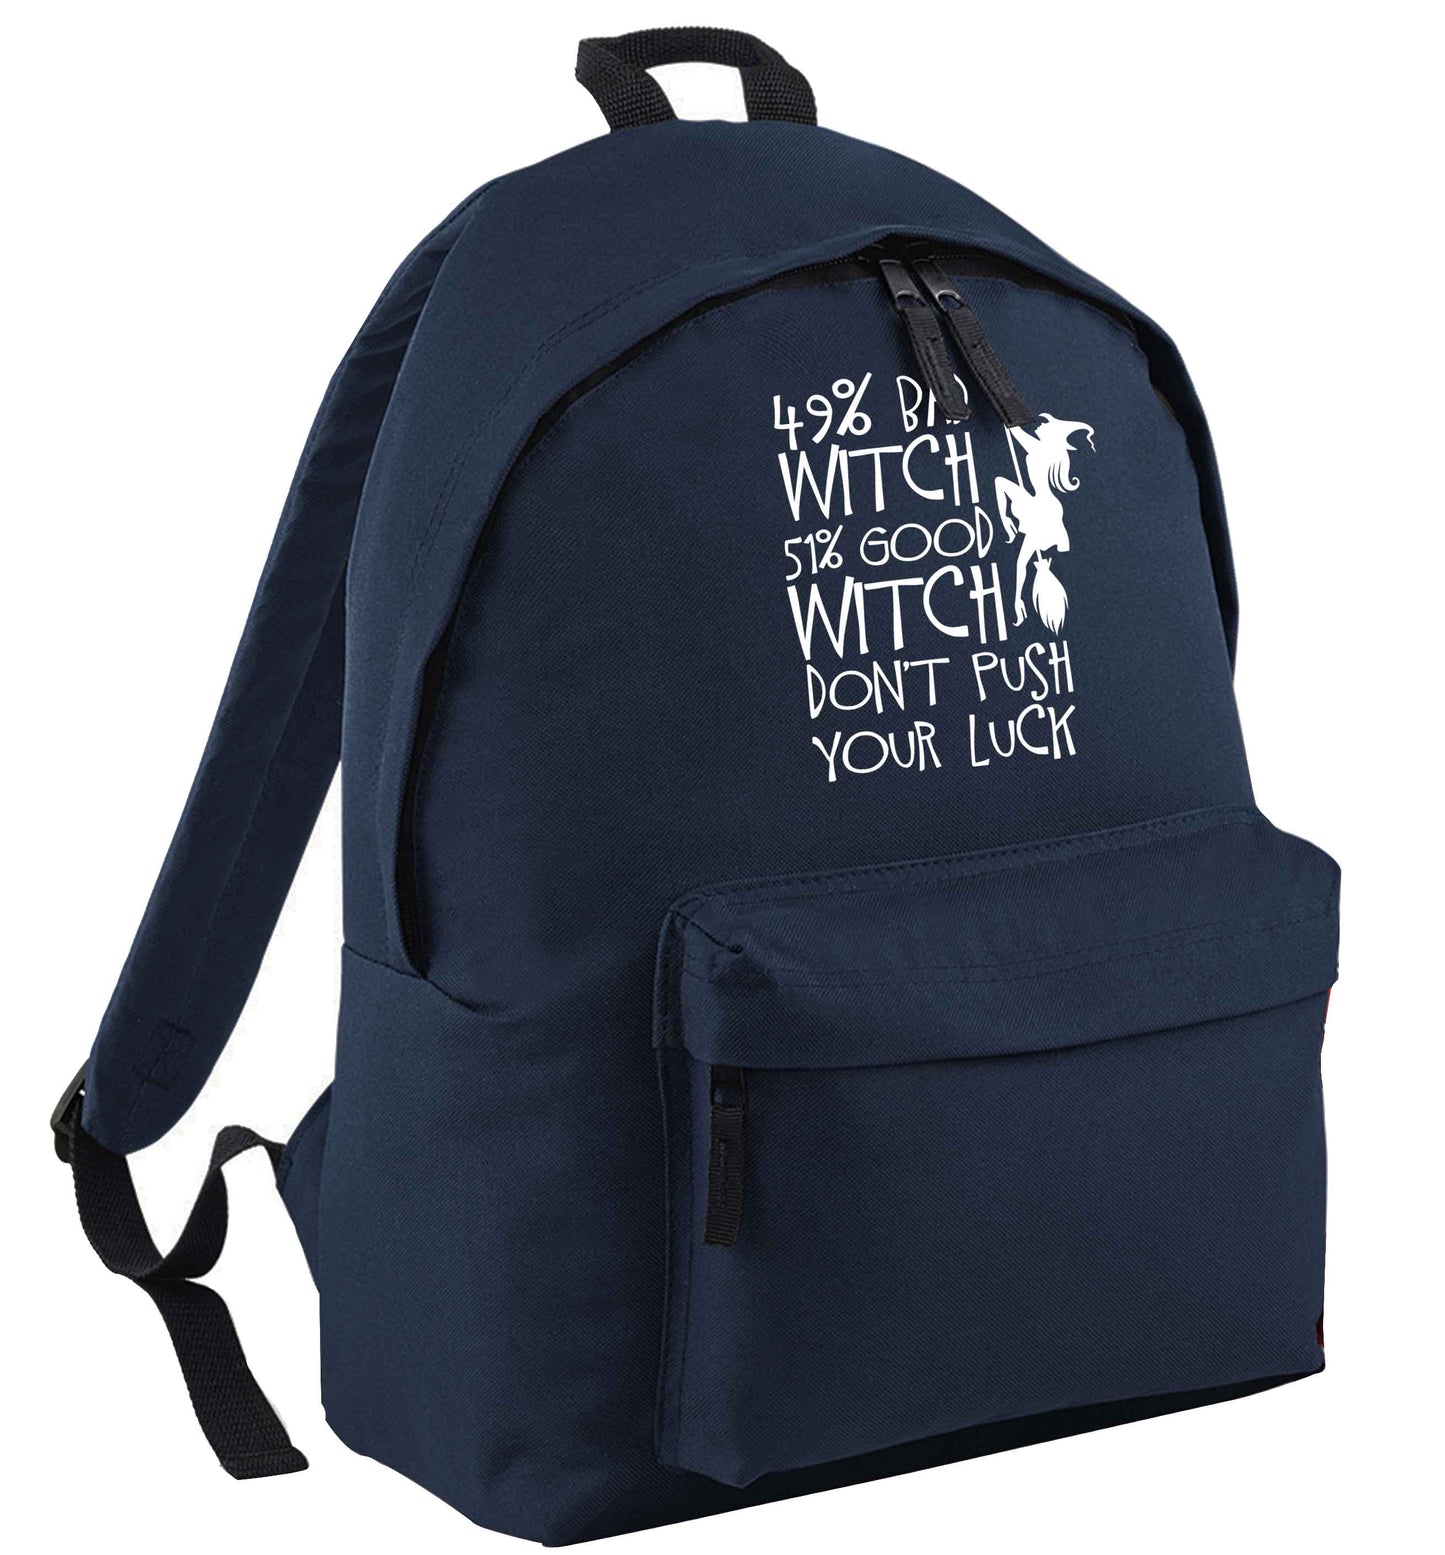 49% bad witch 51% good witch don't push your luck | Children's backpack